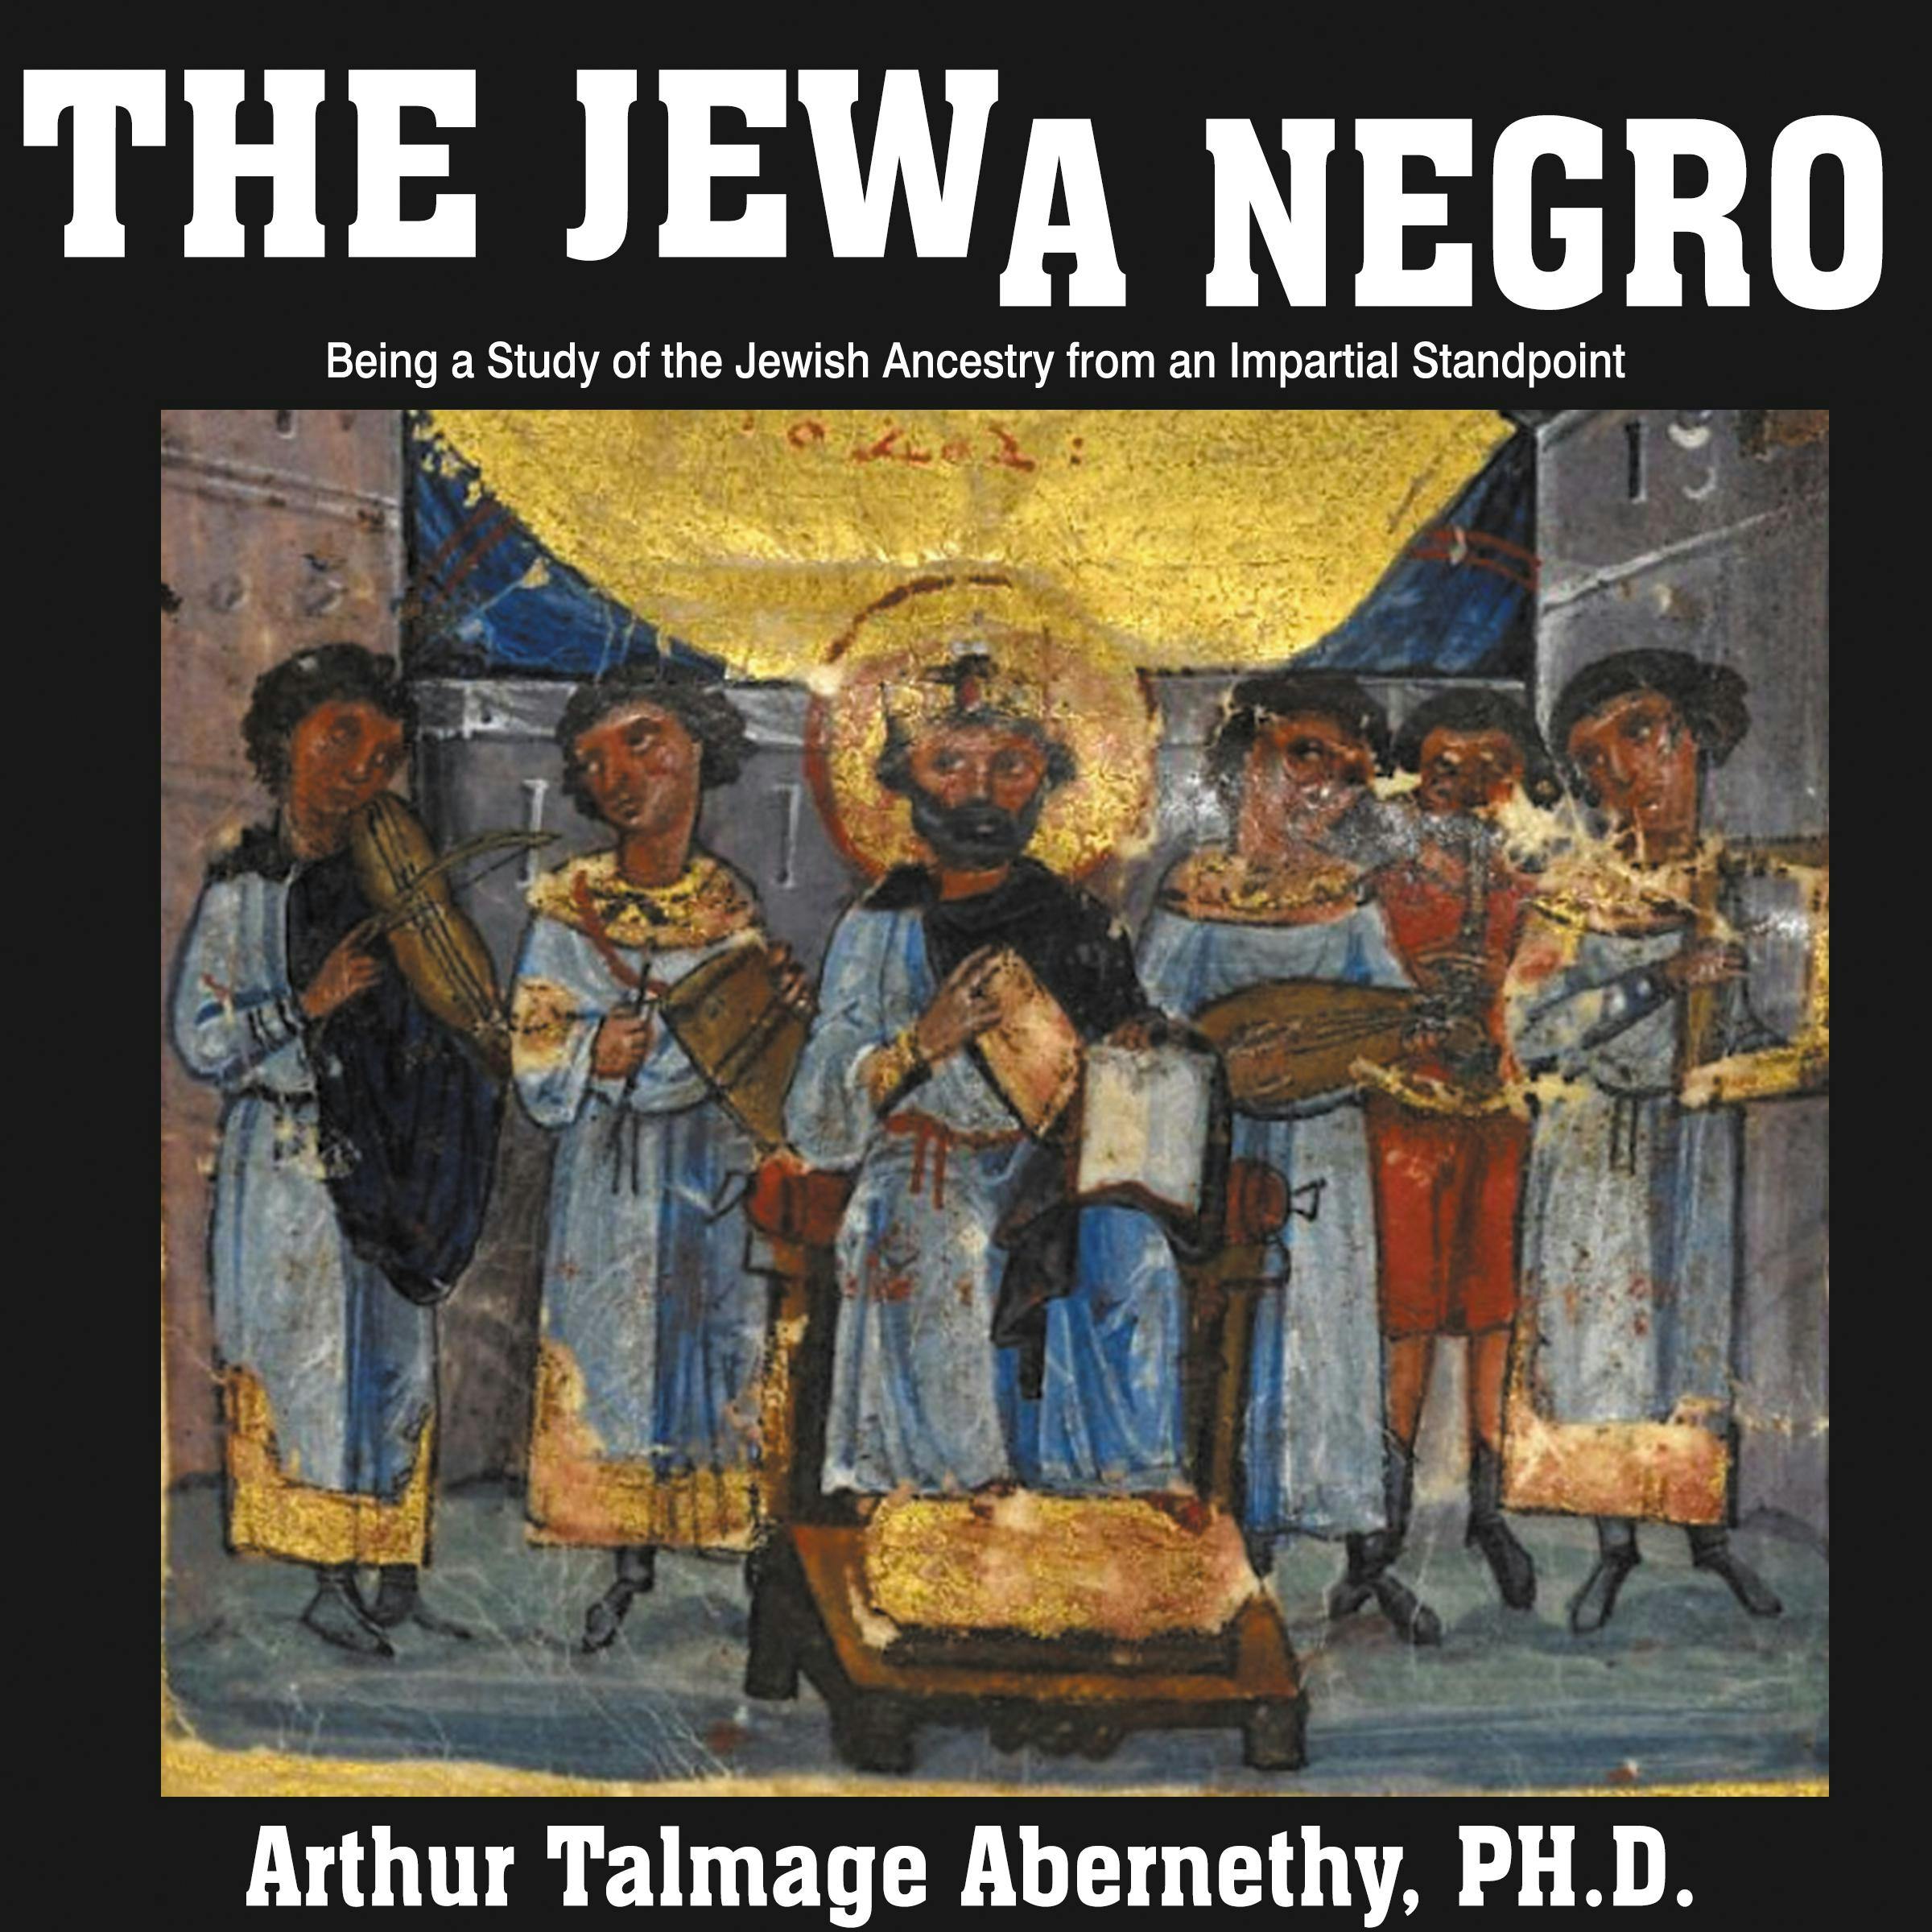 The Jew a Negro: Being a Study of the Jewish Ancestry from an Impartial Standpoint - Arthur Talmage Abernethy